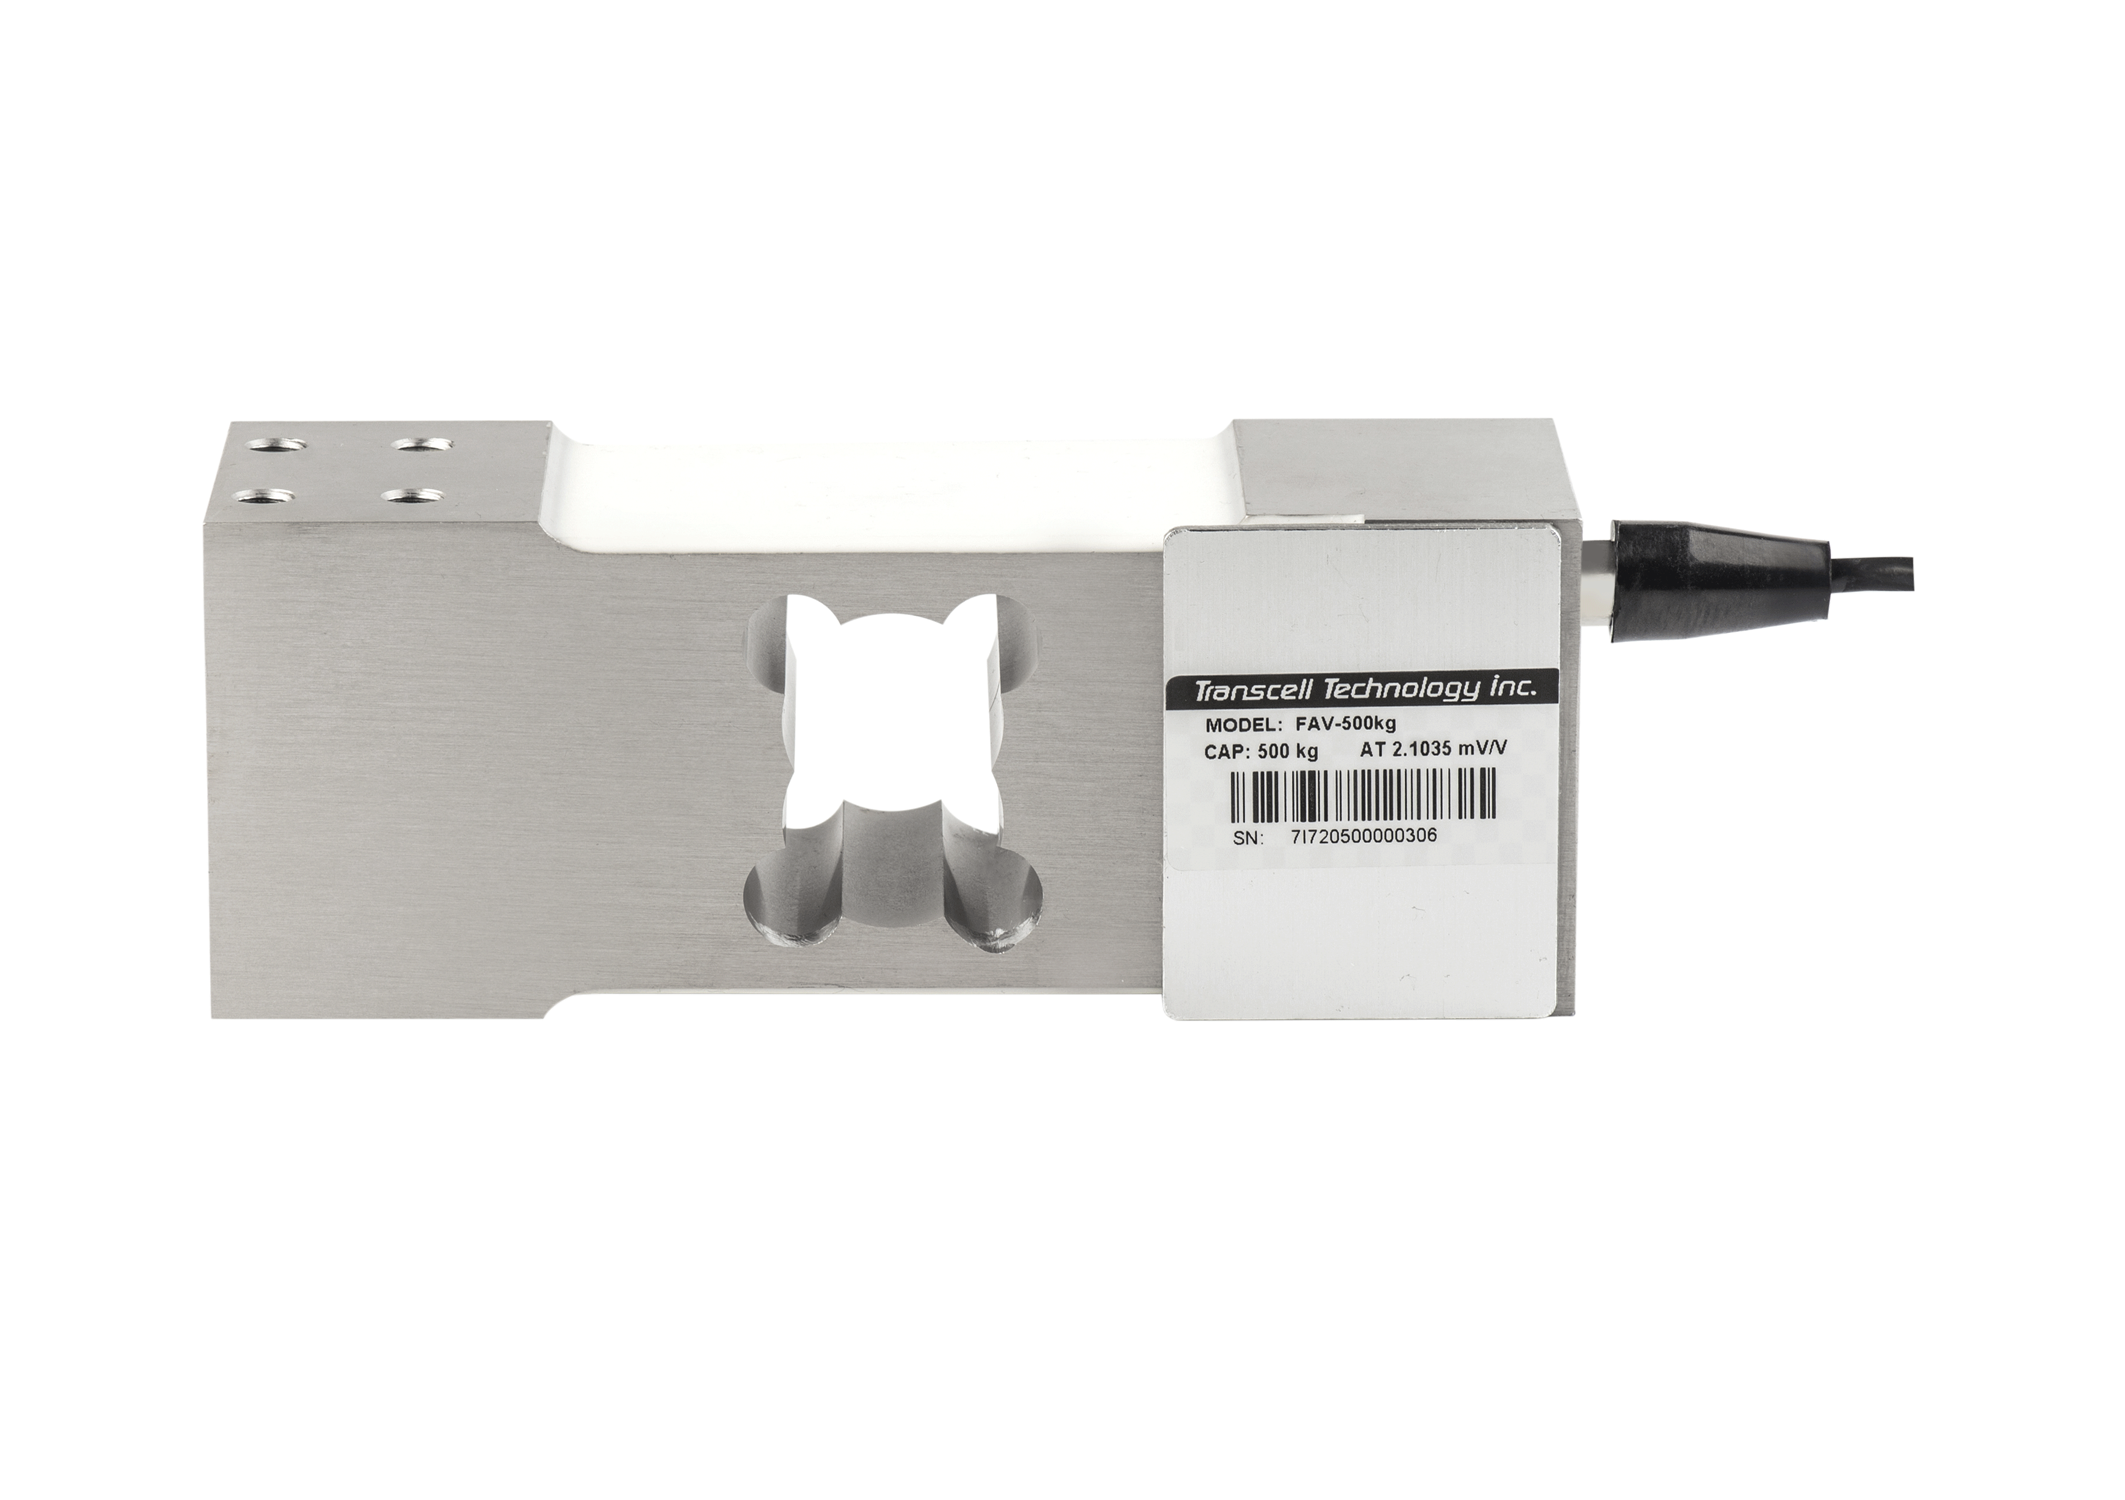 DORAN SCALES INC NEW 1042 Single Point Load Cell 